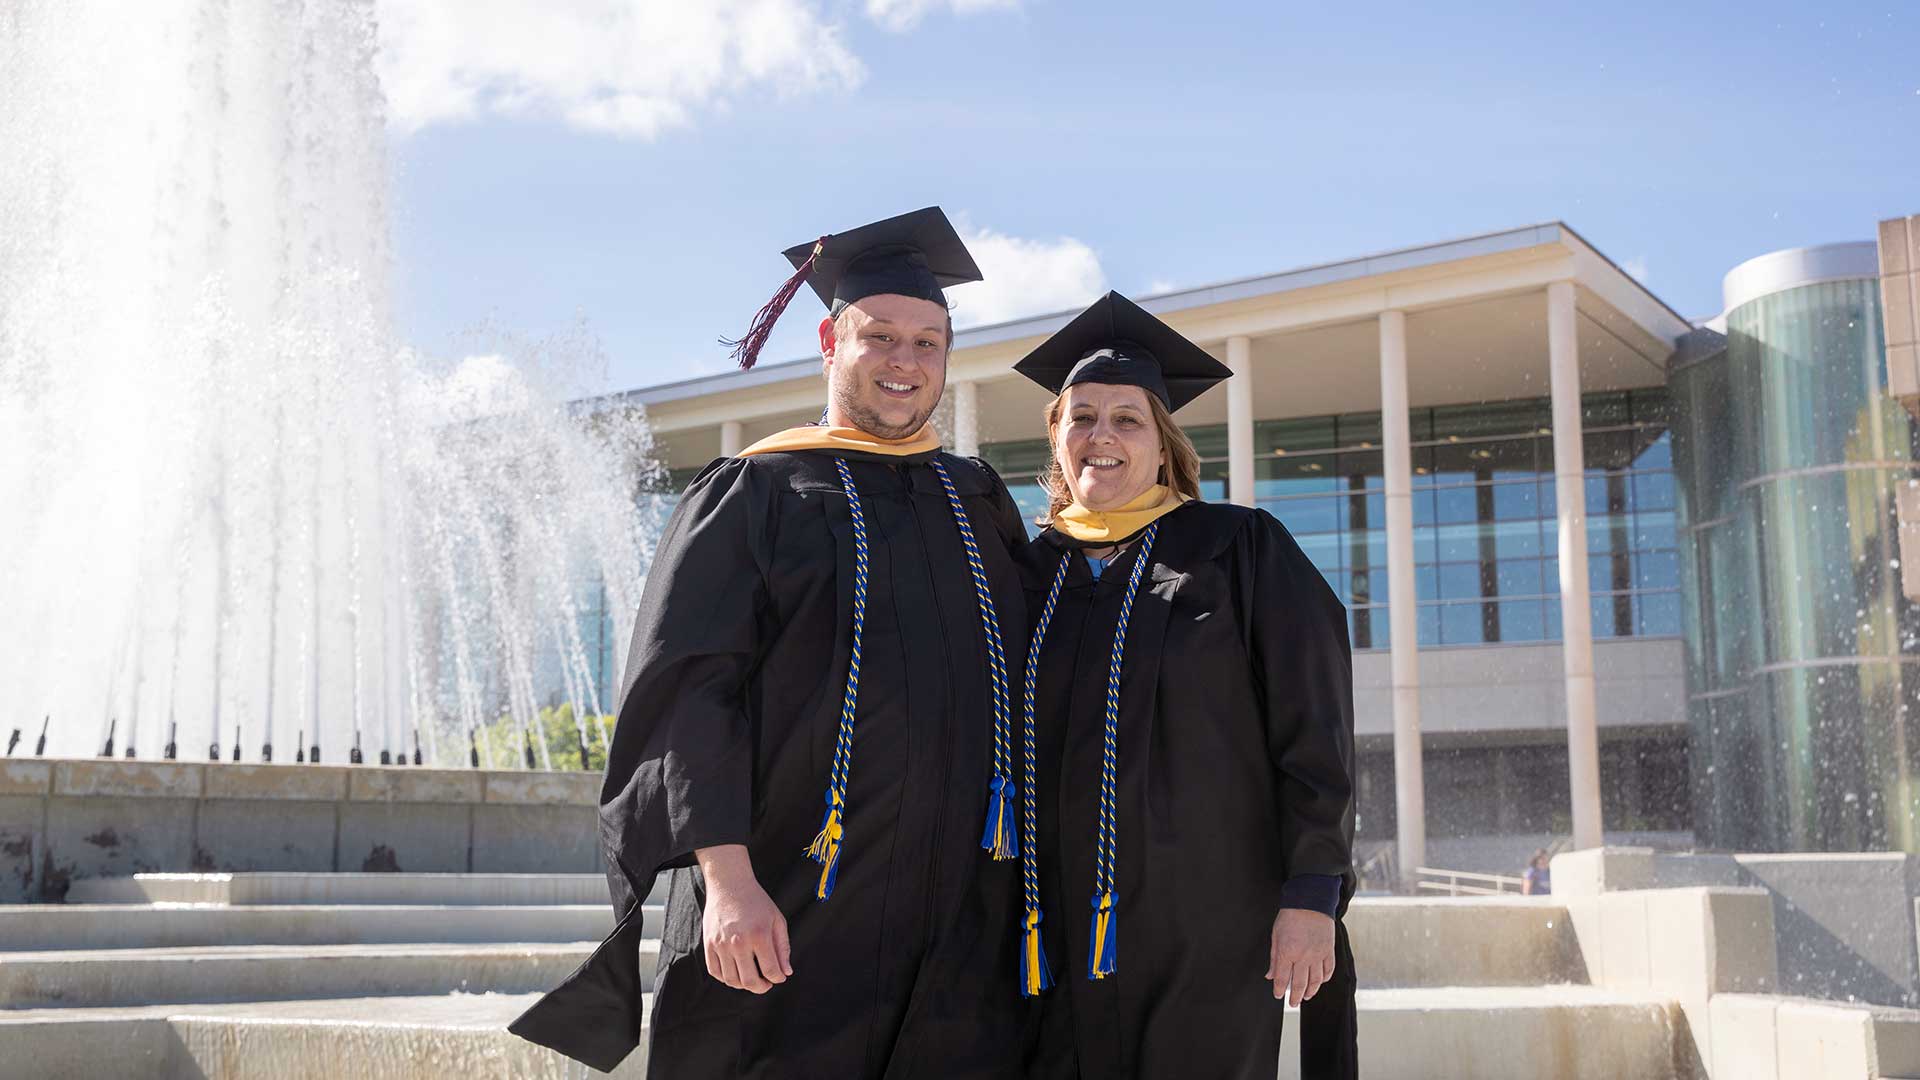 Mother and son graduate with Master’s Degrees in Social Work within the same ceremony.